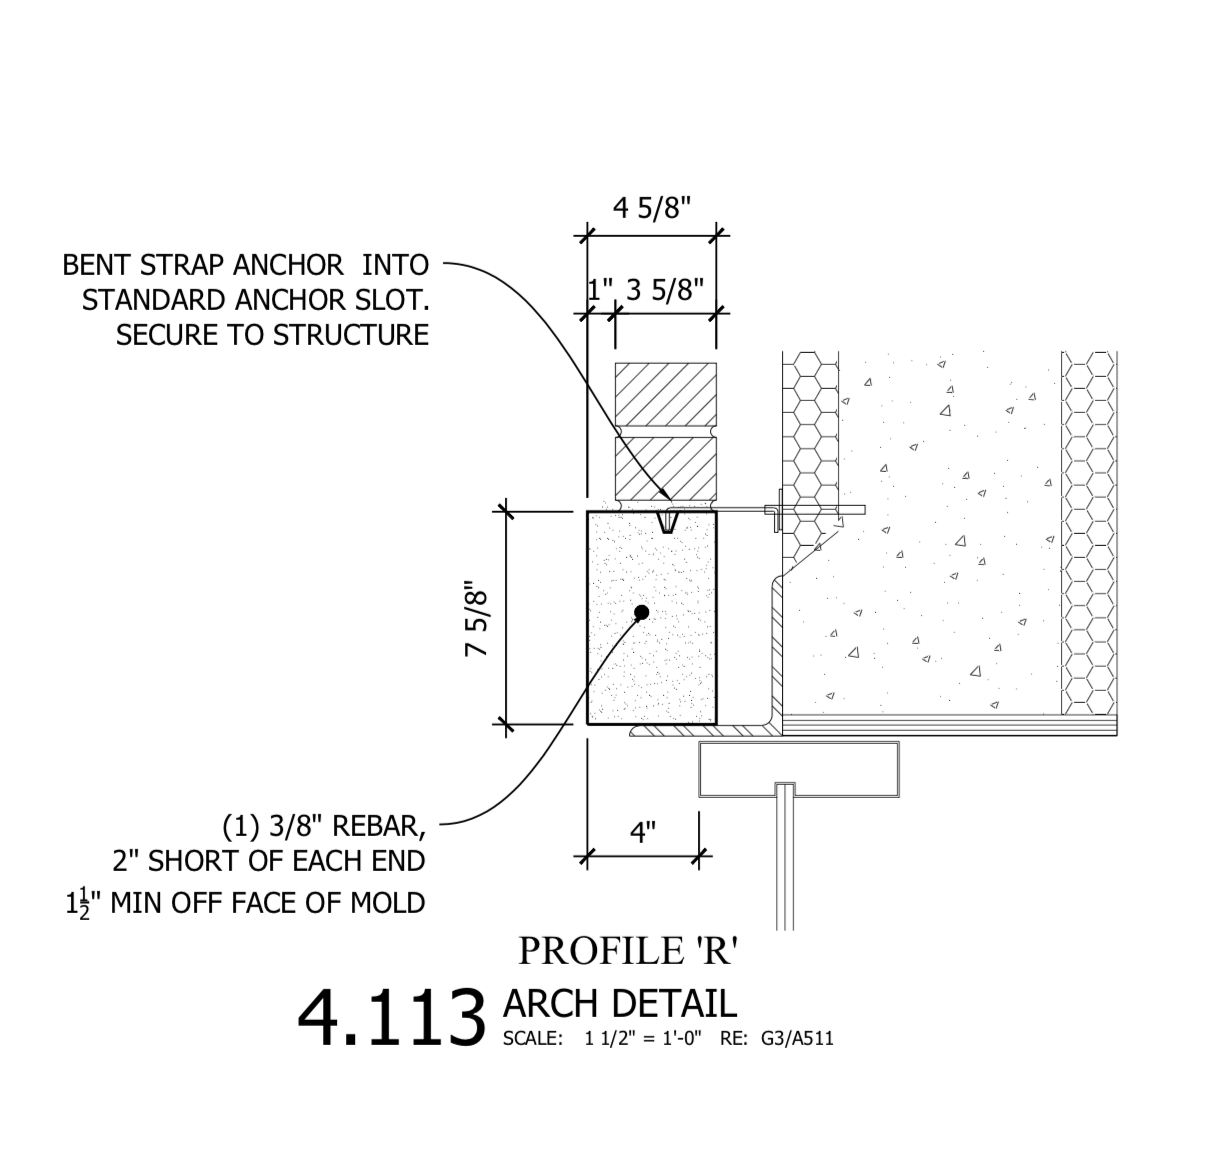 Section 4.113 - Connection Details for Suspended Soffit of Archway